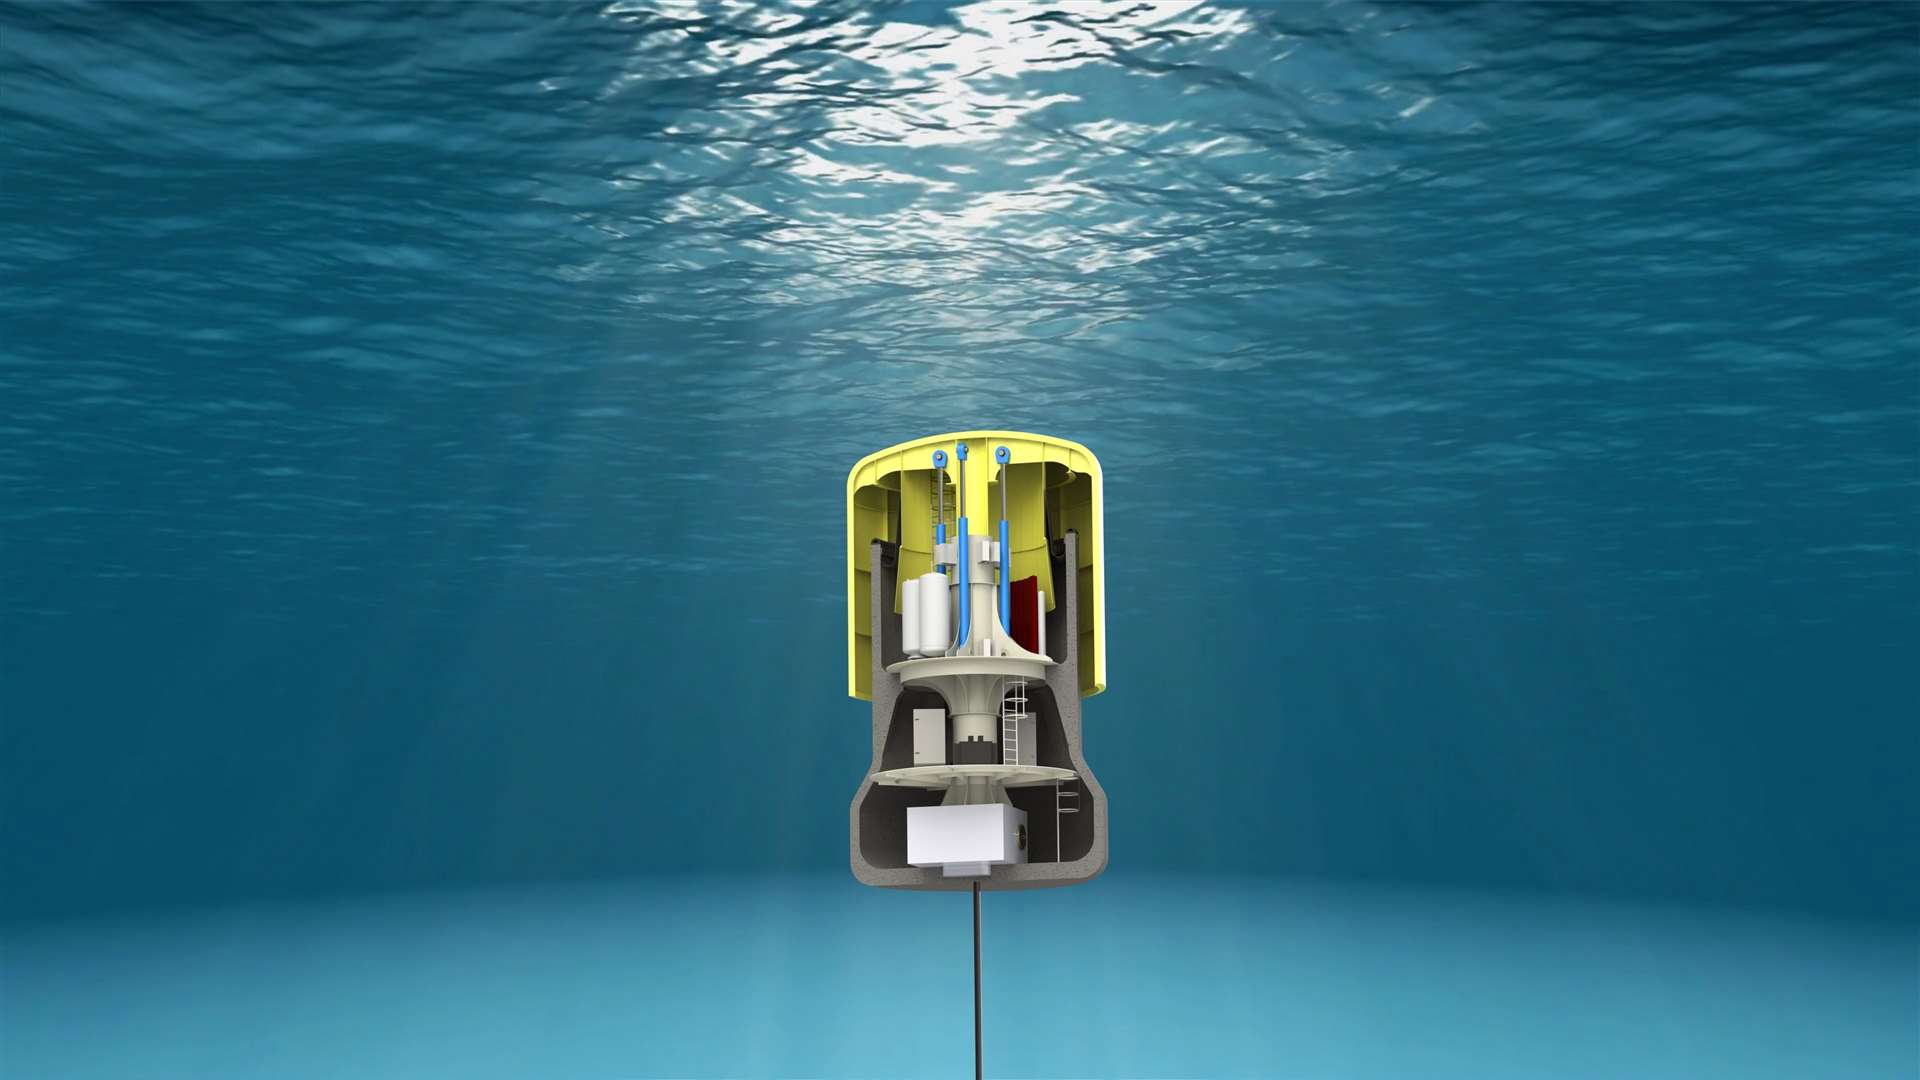 A graphic showing AWS Ocean Energy's Waveswing device.